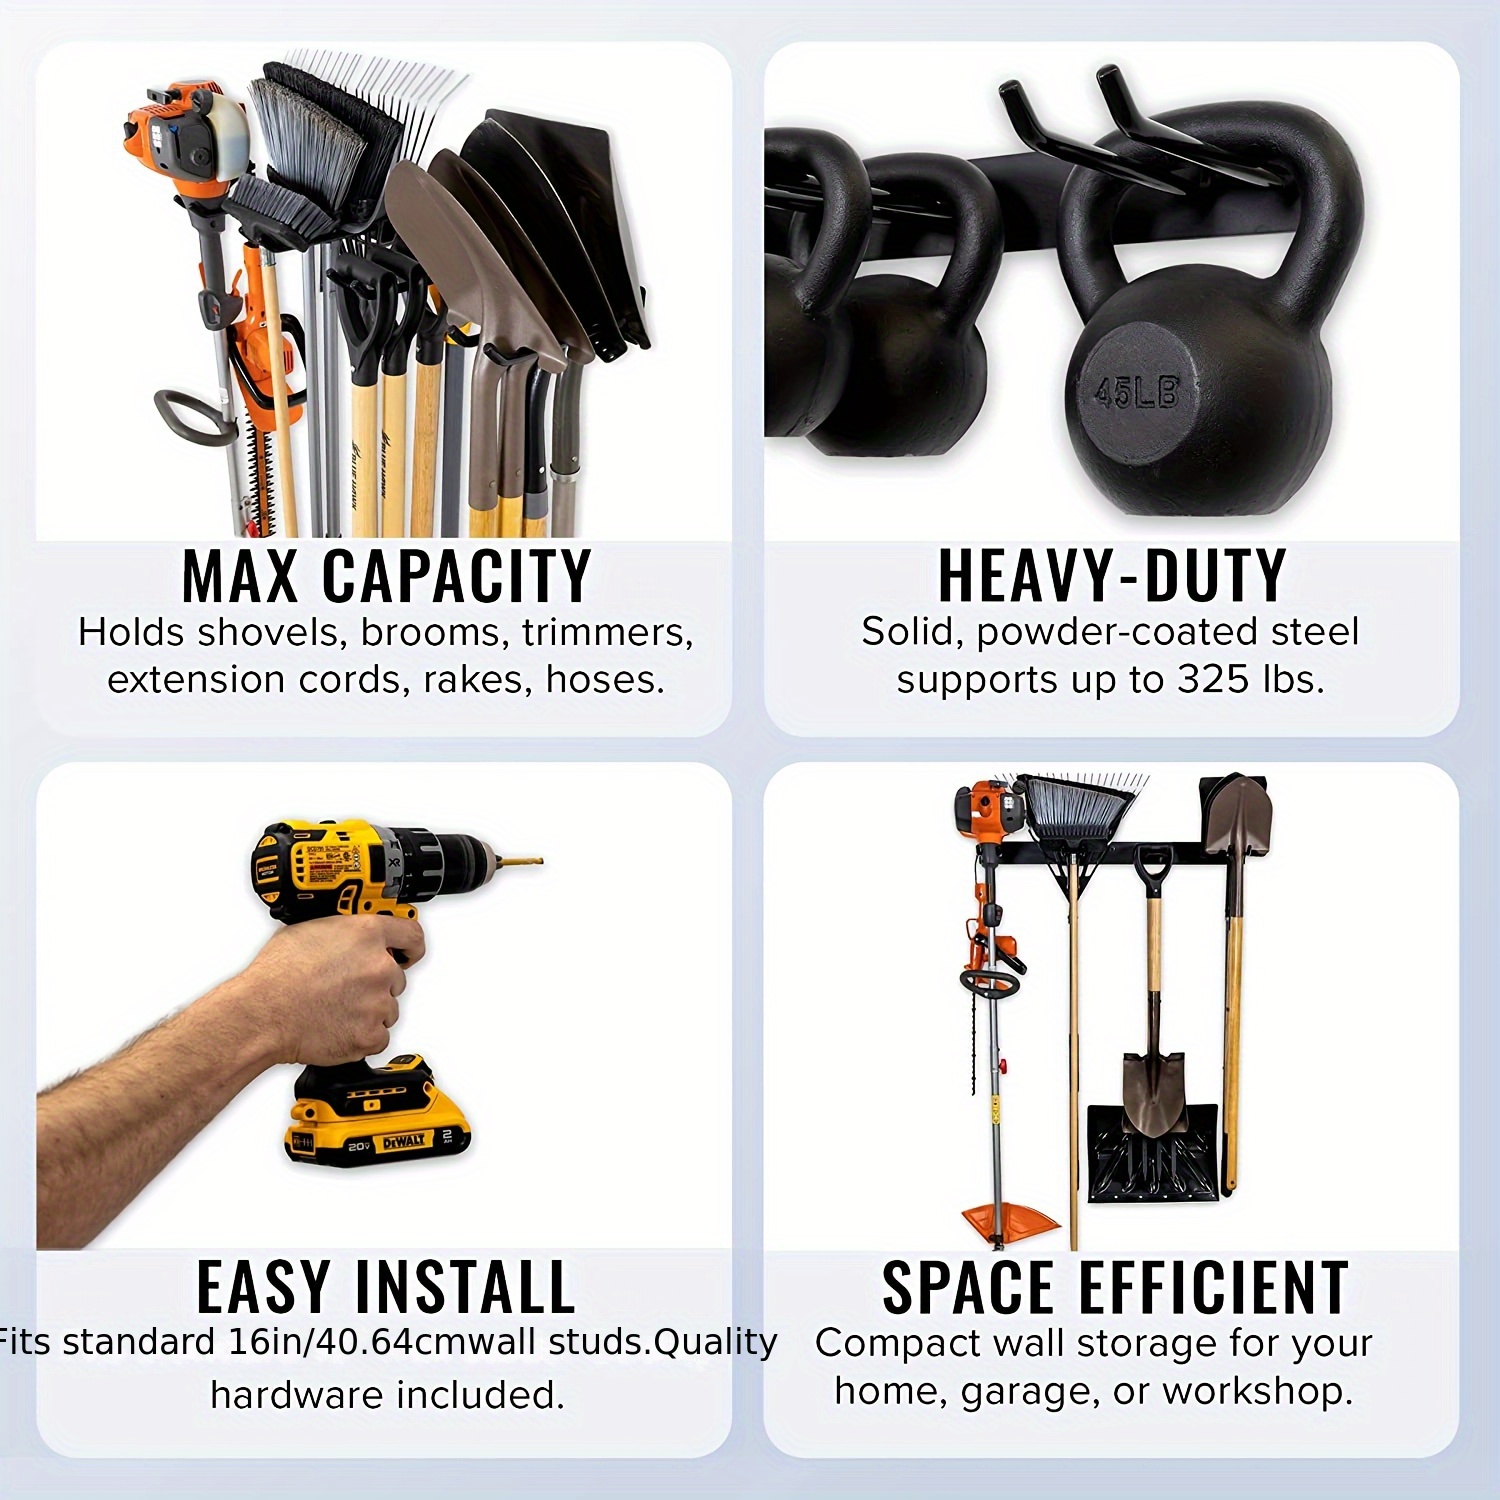 Power Tools, Garden Tools, Household Products